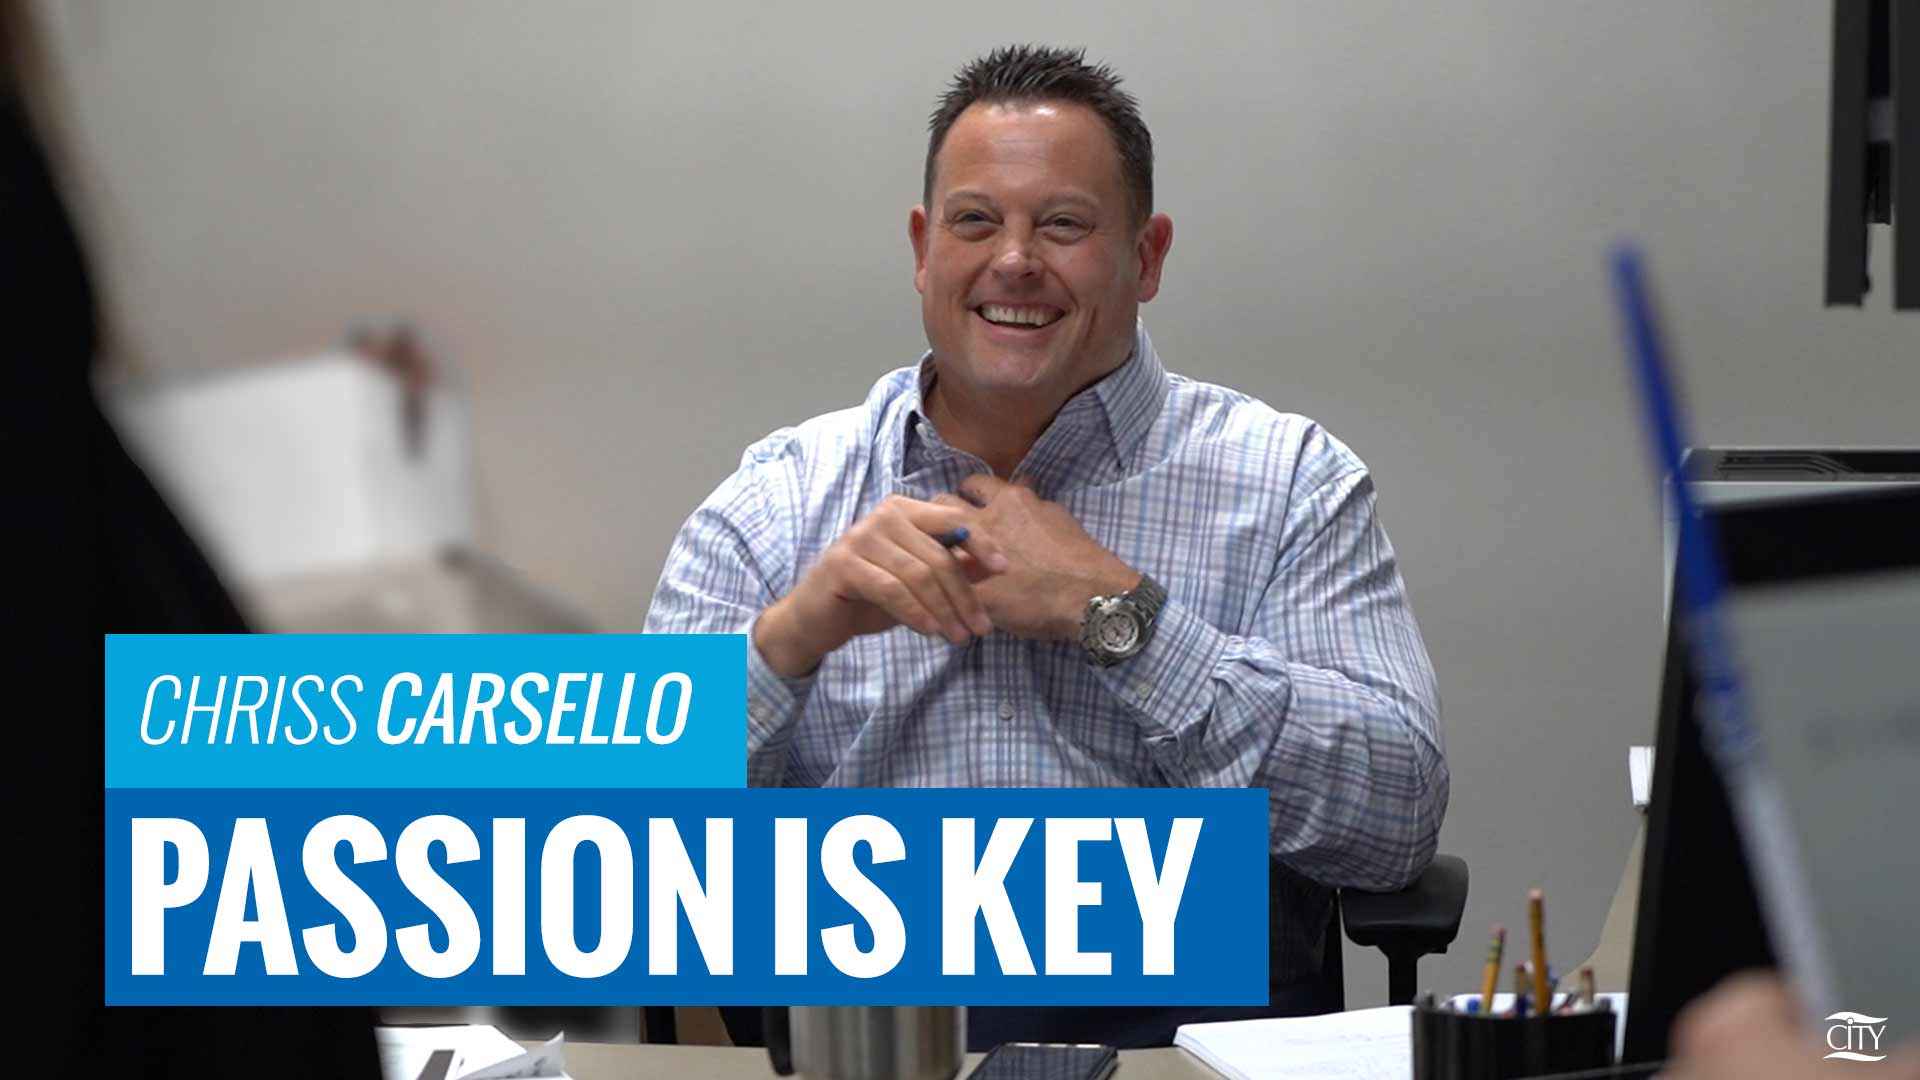 CITY Sales Manager, Chriss Carsello, smiling for a picture during an interview for a passion is key graphic.